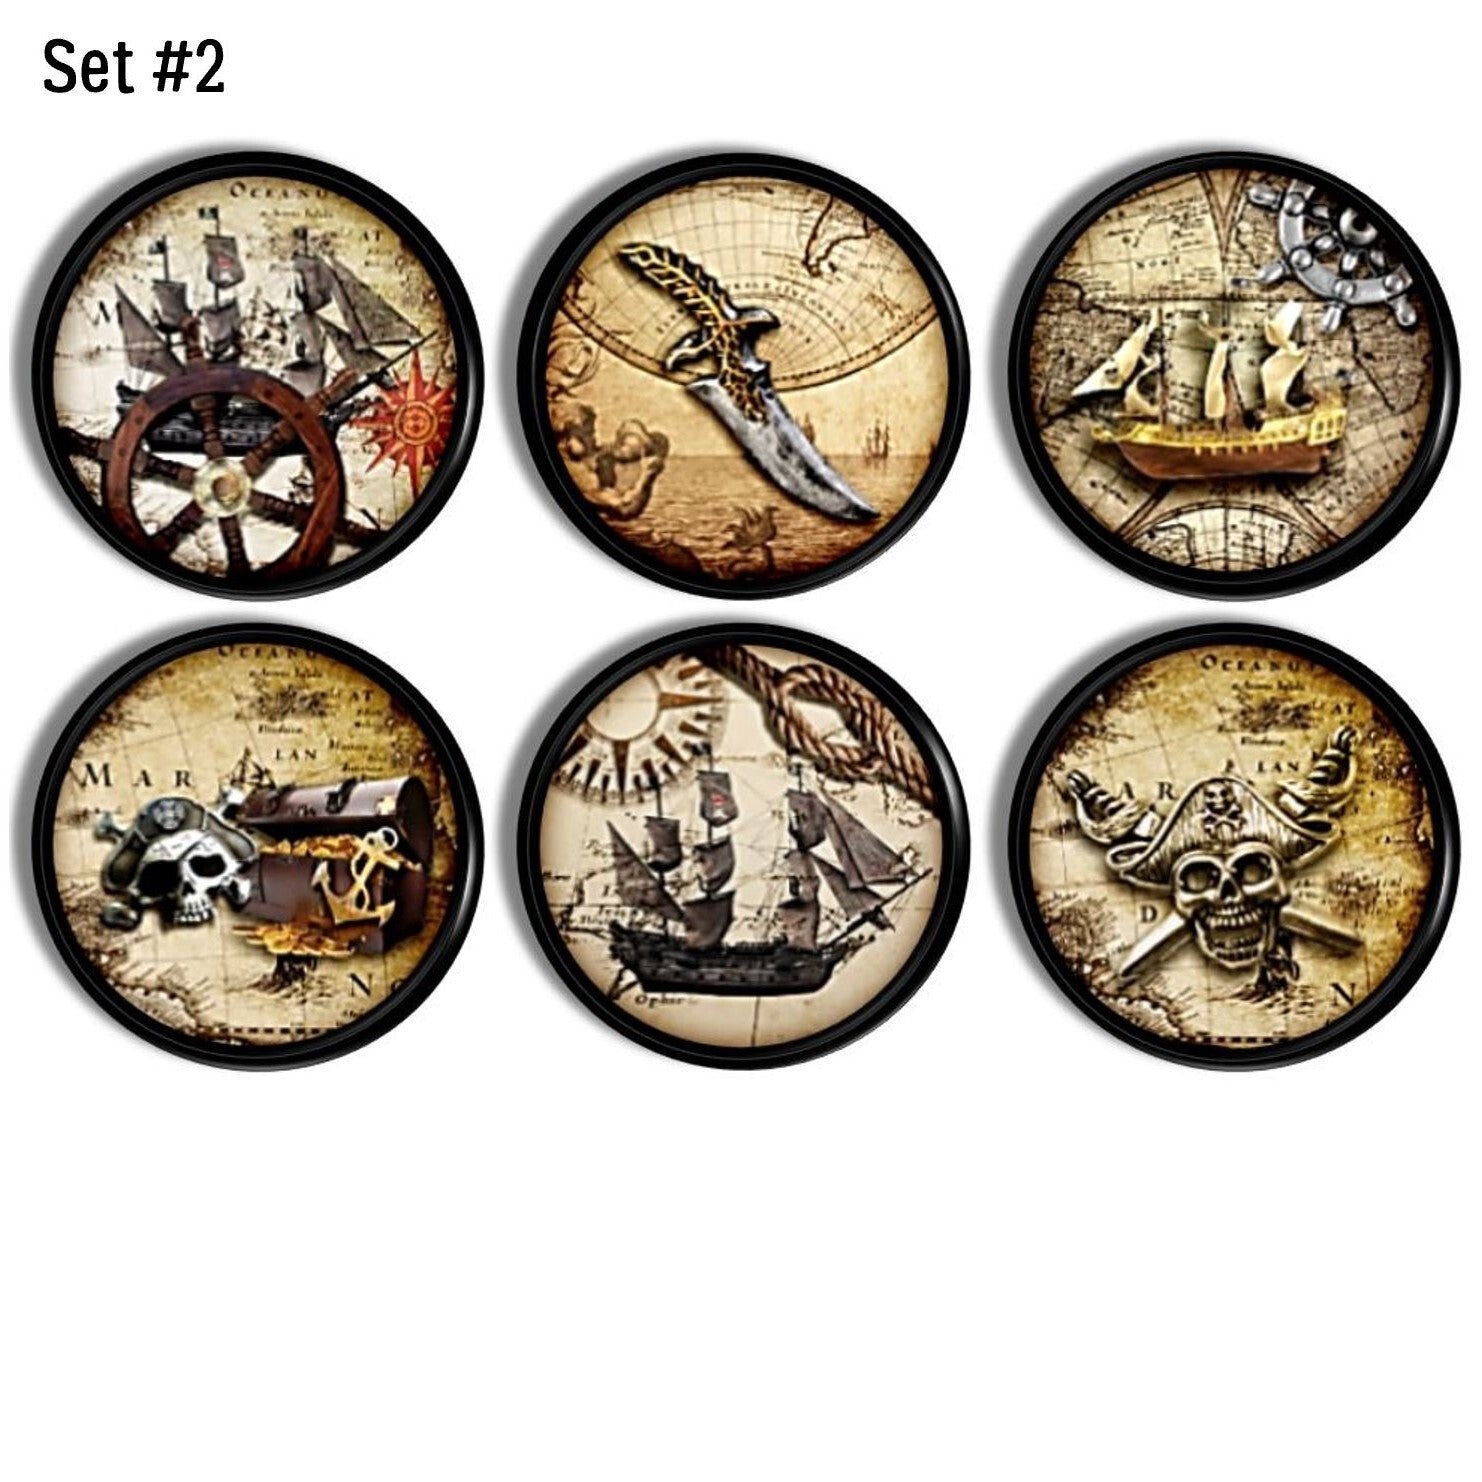 Men&#39;s nautical office decor decorative furniture drawer pull set. Earthy, rustic pirate treasure map theme with ship wheel, skull, dagger and gold on black hardware.